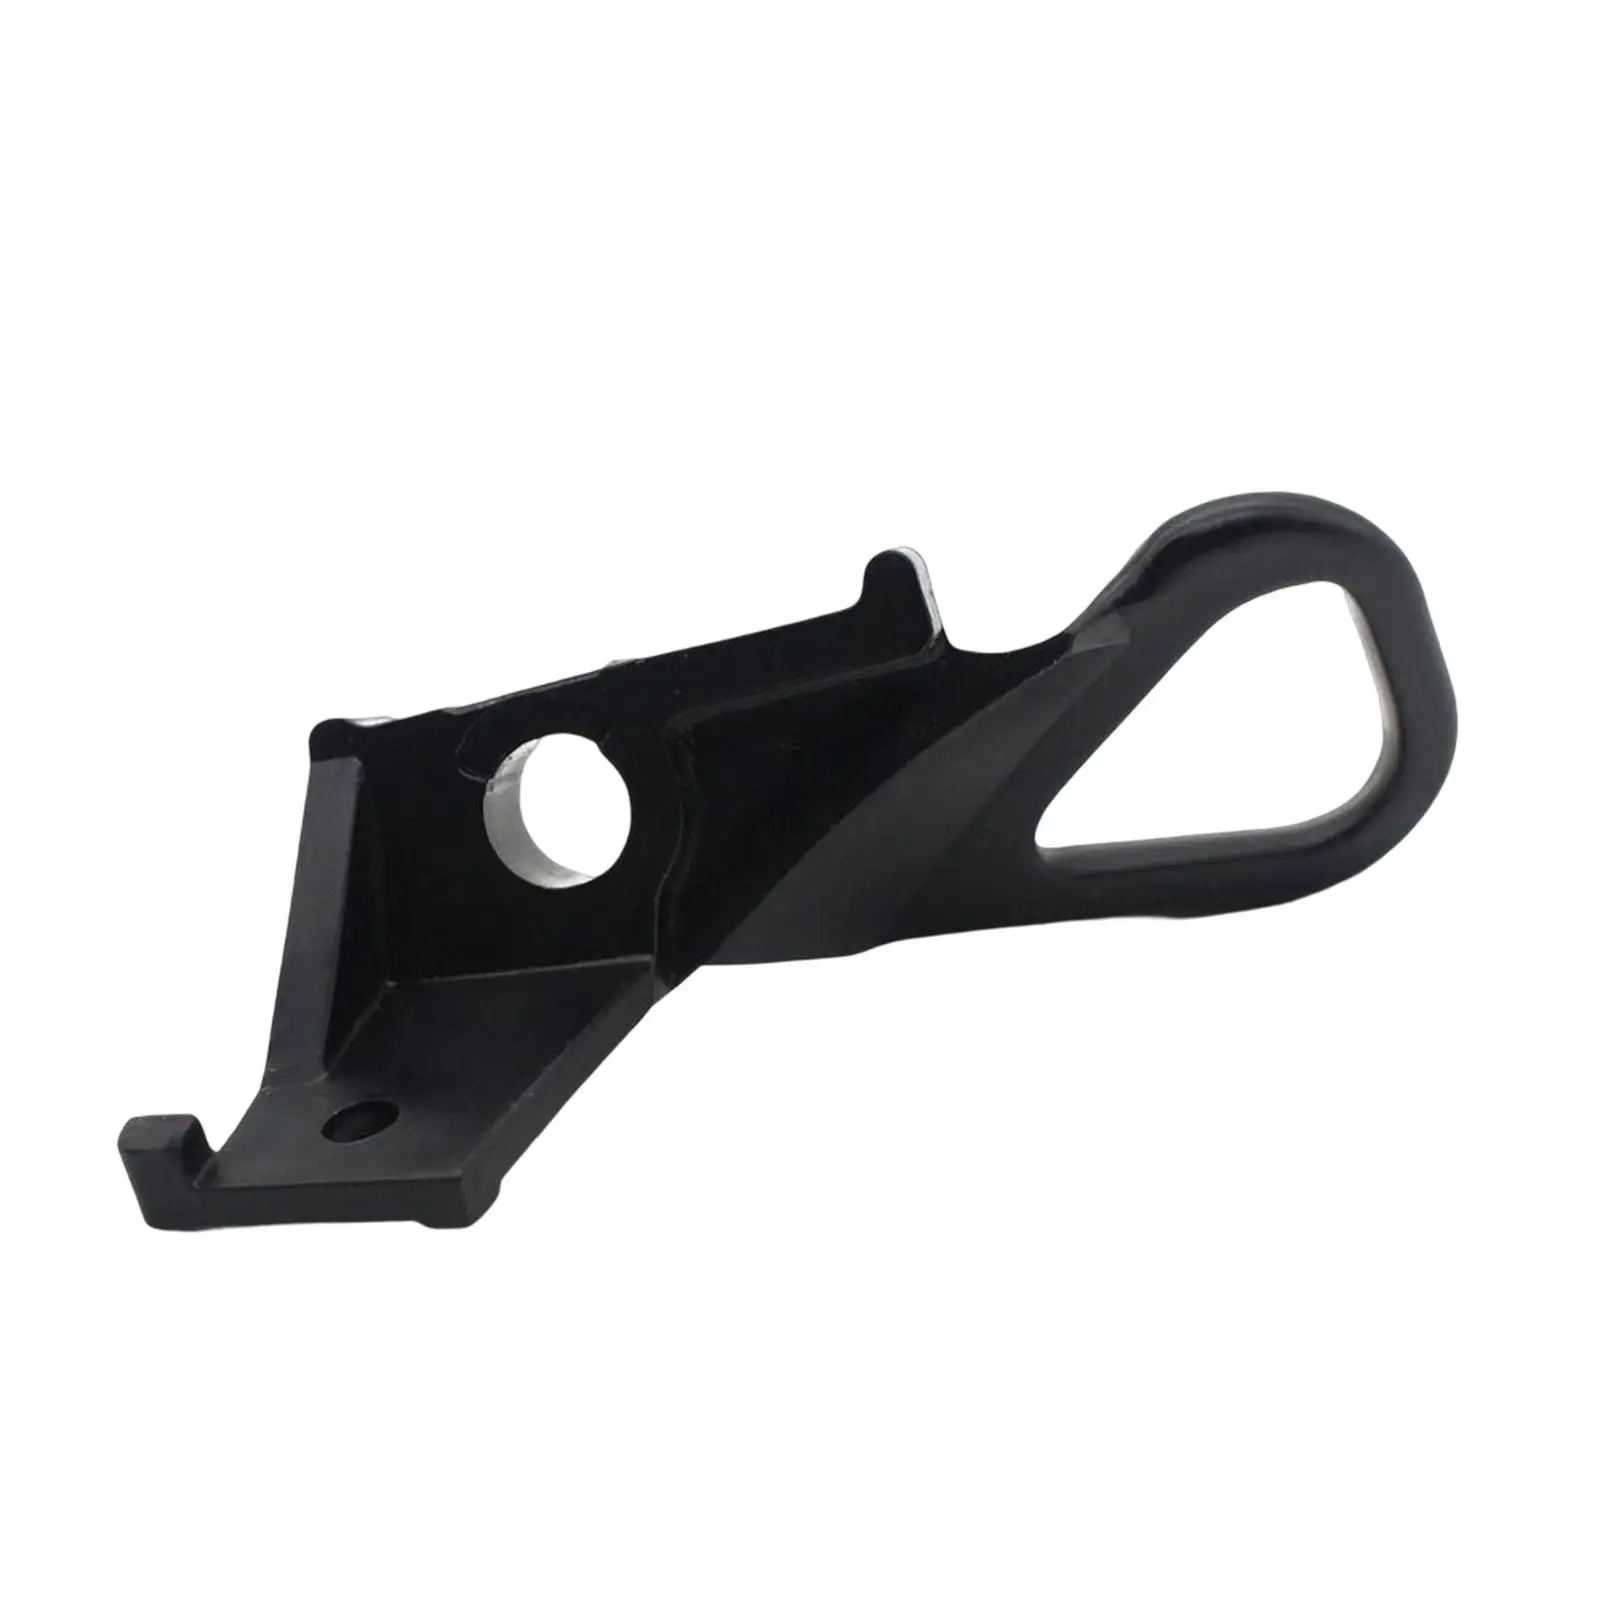 Black Oil Cup Bracket Durable Motorcycle Accessory for Yamaha Yzf R1